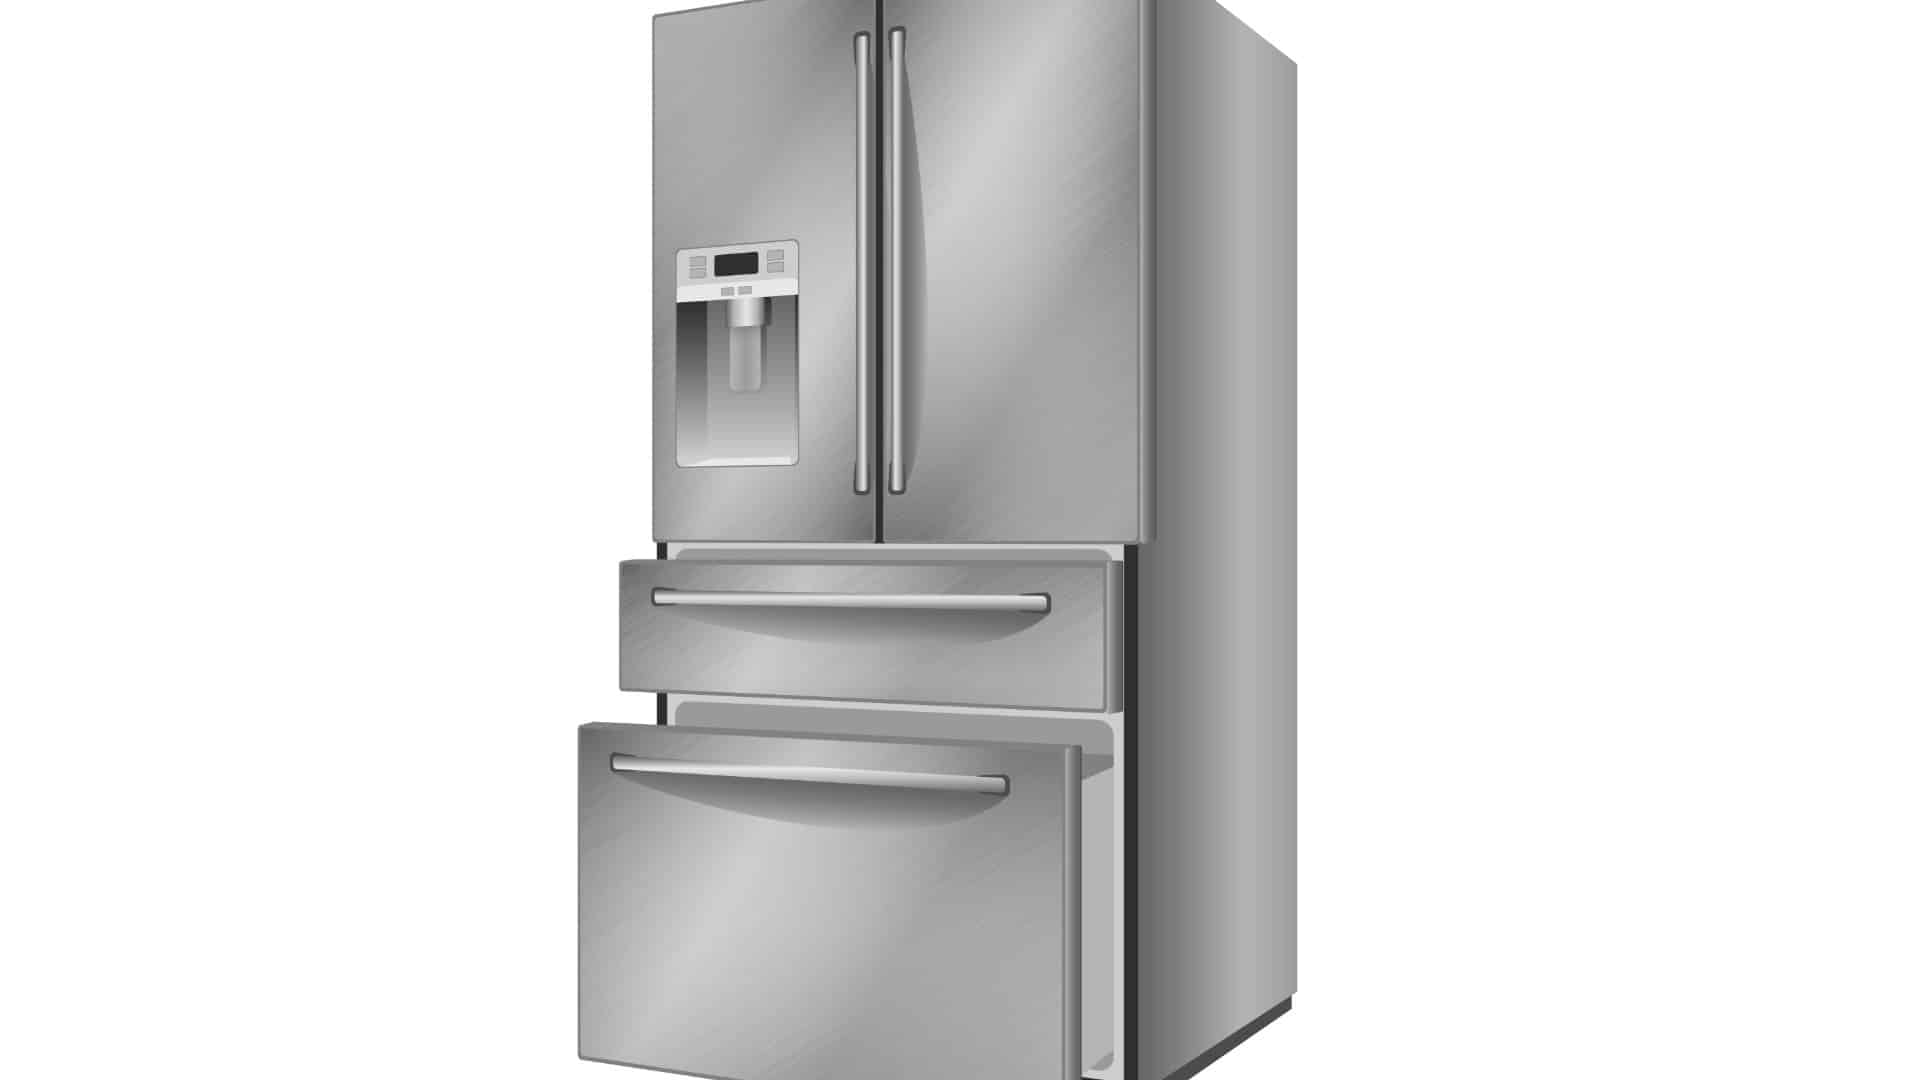 Featured image for “5 Common LG Refrigerator Problems”